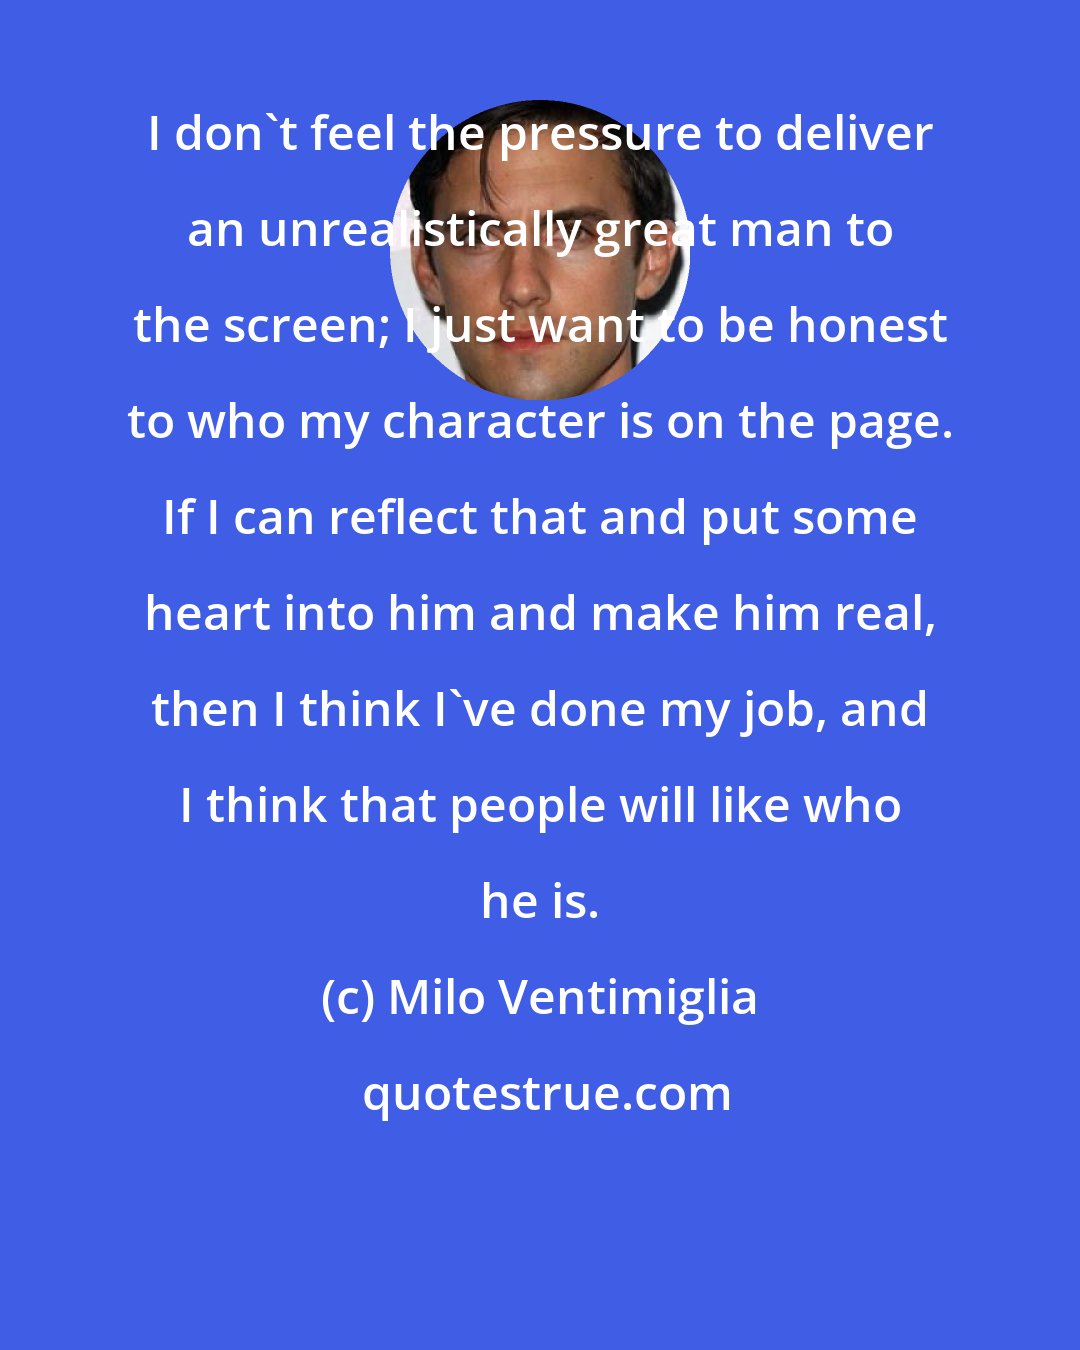 Milo Ventimiglia: I don't feel the pressure to deliver an unrealistically great man to the screen; I just want to be honest to who my character is on the page. If I can reflect that and put some heart into him and make him real, then I think I've done my job, and I think that people will like who he is.